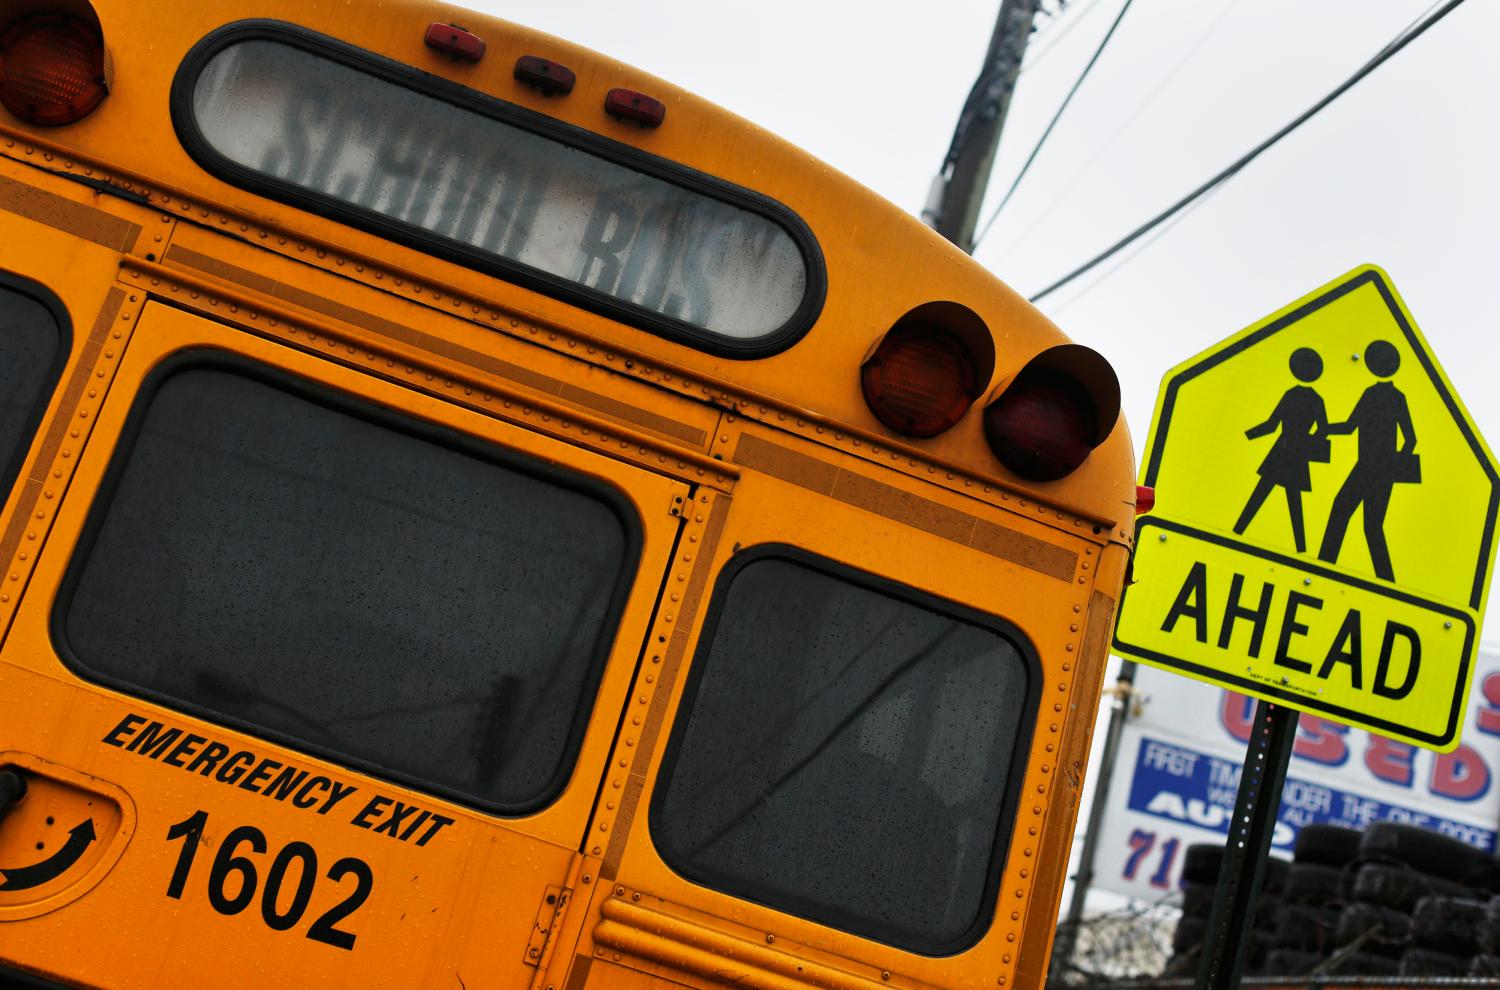 A school bus sits parked along a street in the Queens borough of New York January 16, 2013. For the first time in 34 years, New York City bus drivers went on strike, stranding up to 152,000 students in the nation's largest public school system on sleet-soaked Wednesday morning. REUTERS/Shannon Stapleton (UNITED STATES - Tags: EDUCATION CIVIL UNREST BUSINESS EMPLOYMENT) - RTR3CJ15